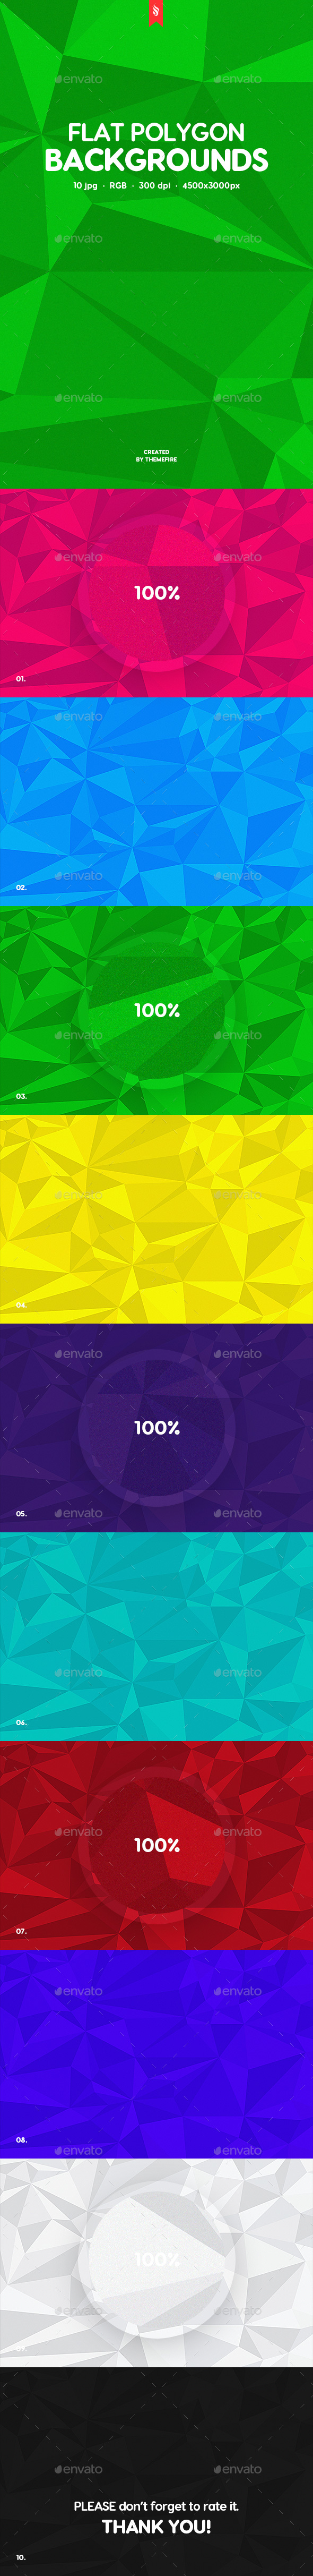 Abstract Flat Polygon Backgrounds